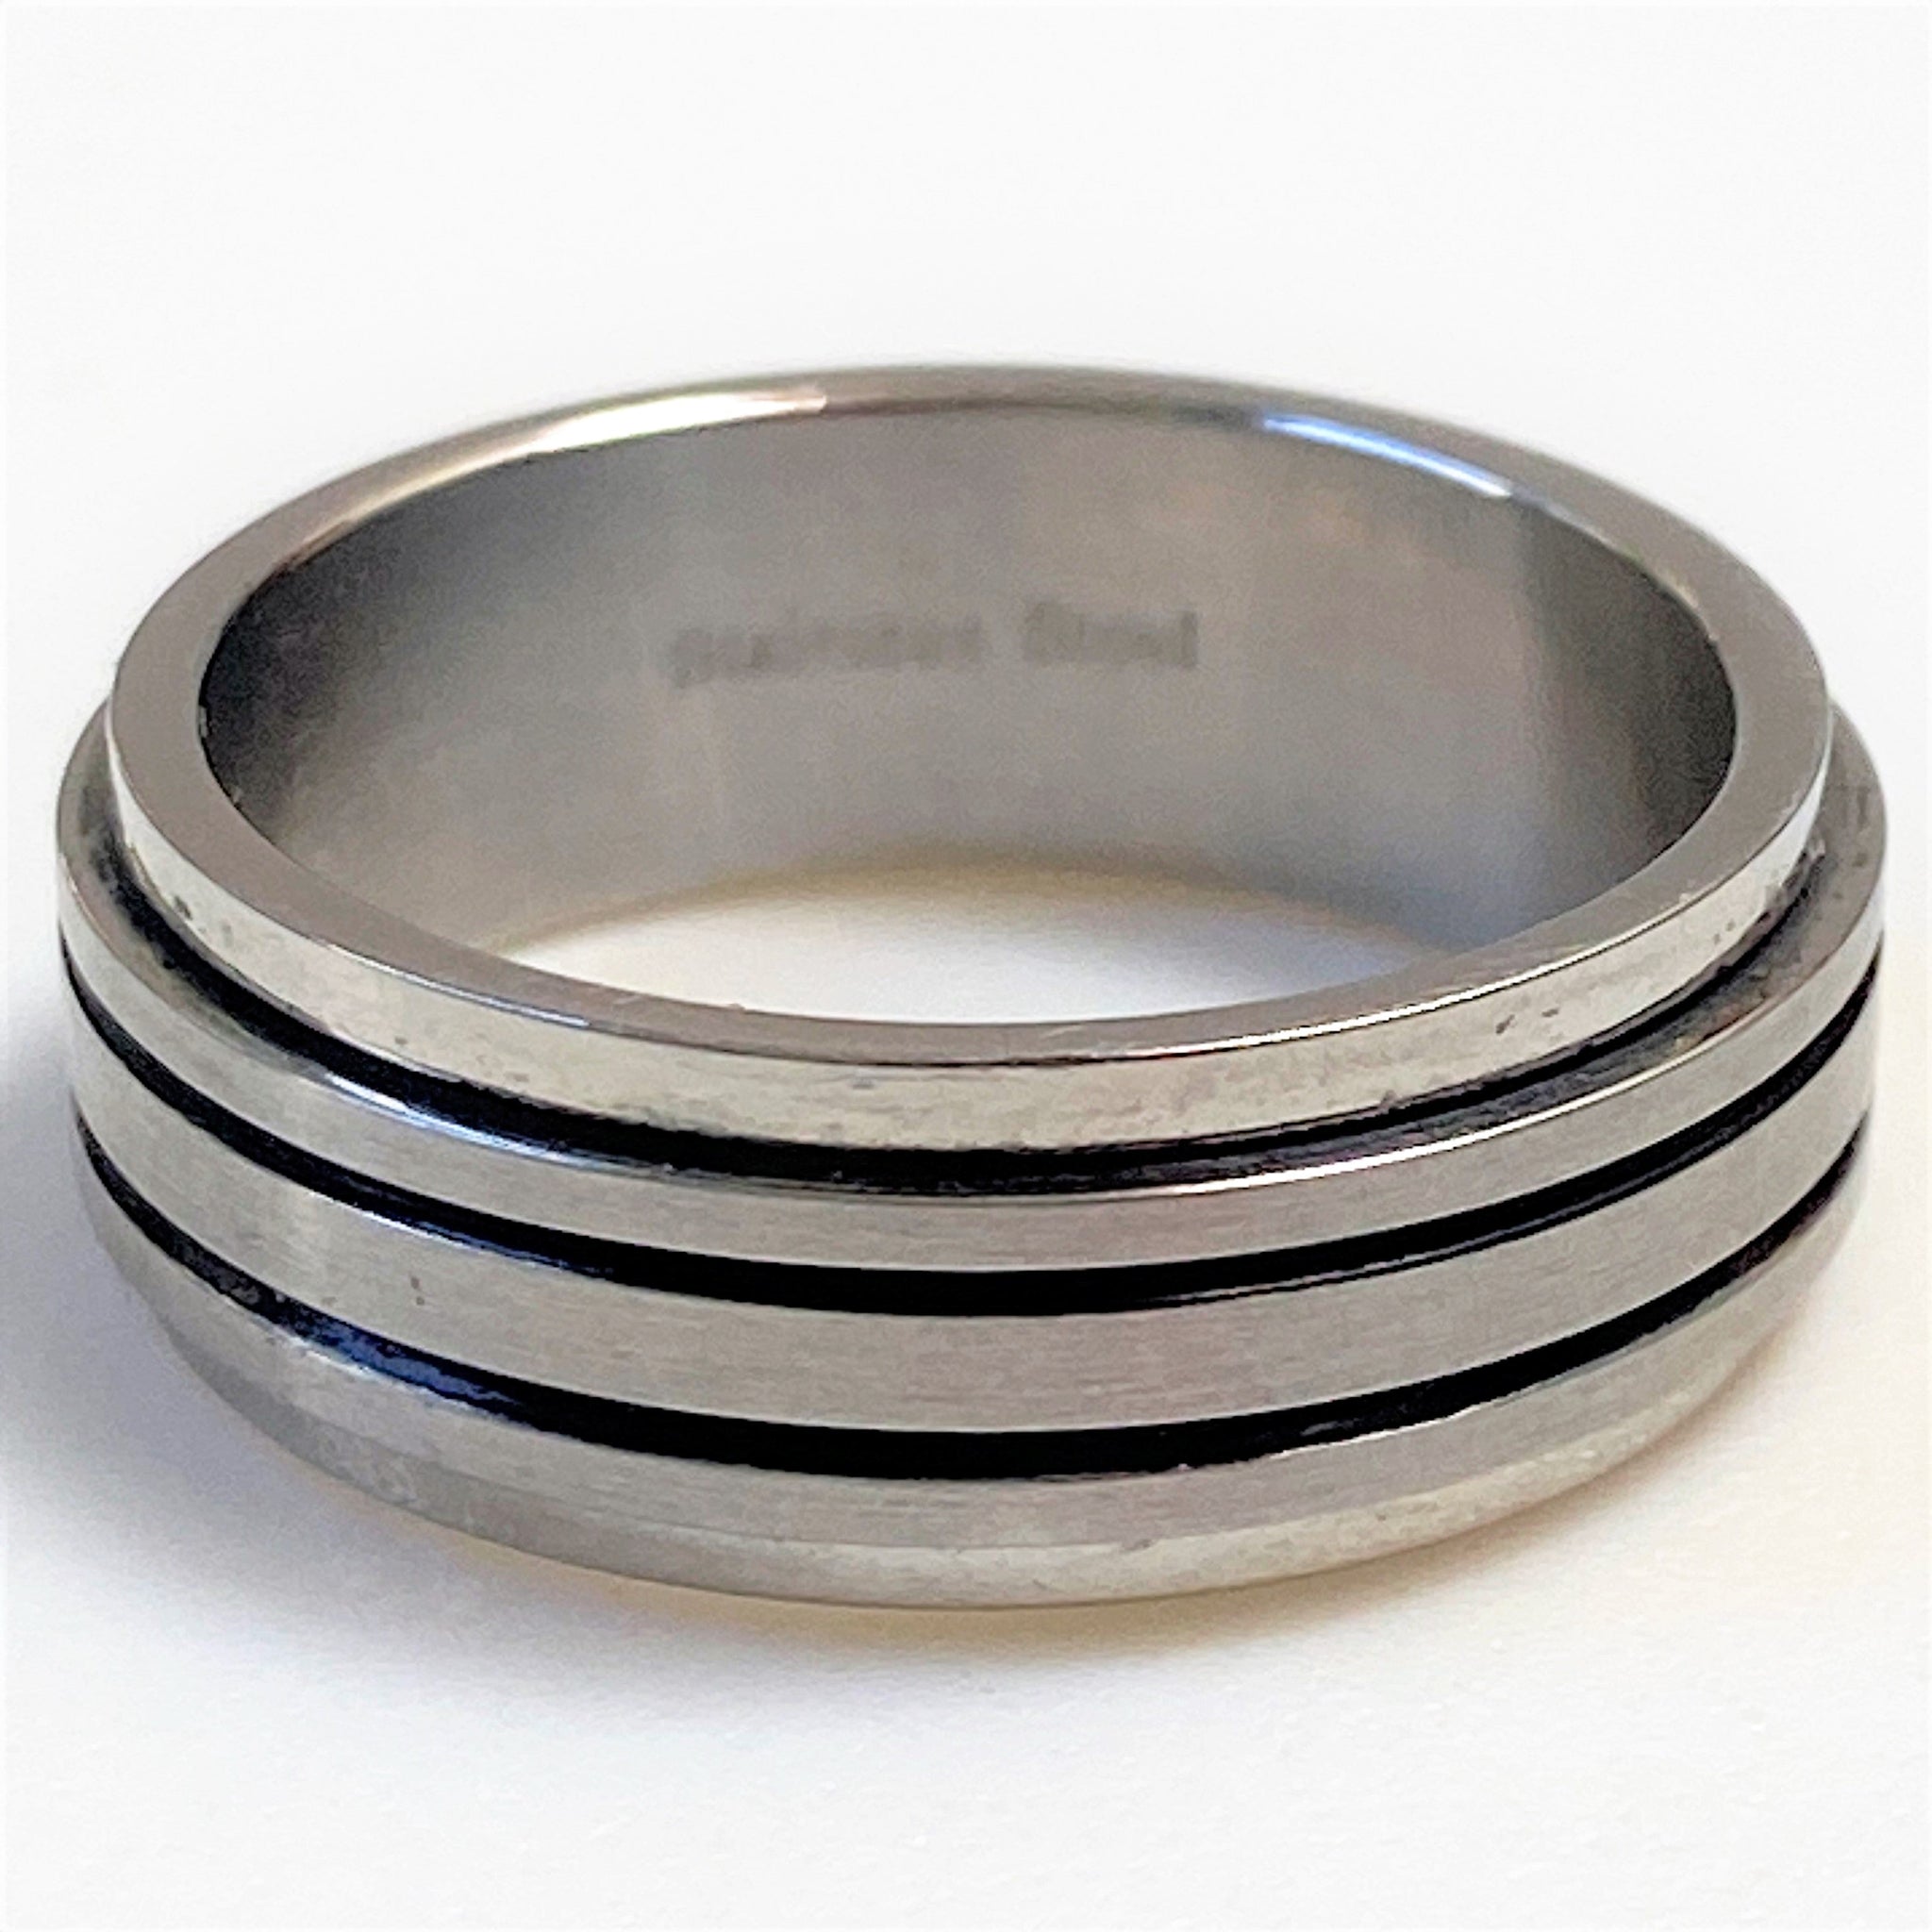 Stainless Steel Men’s Ring with Rotating Element